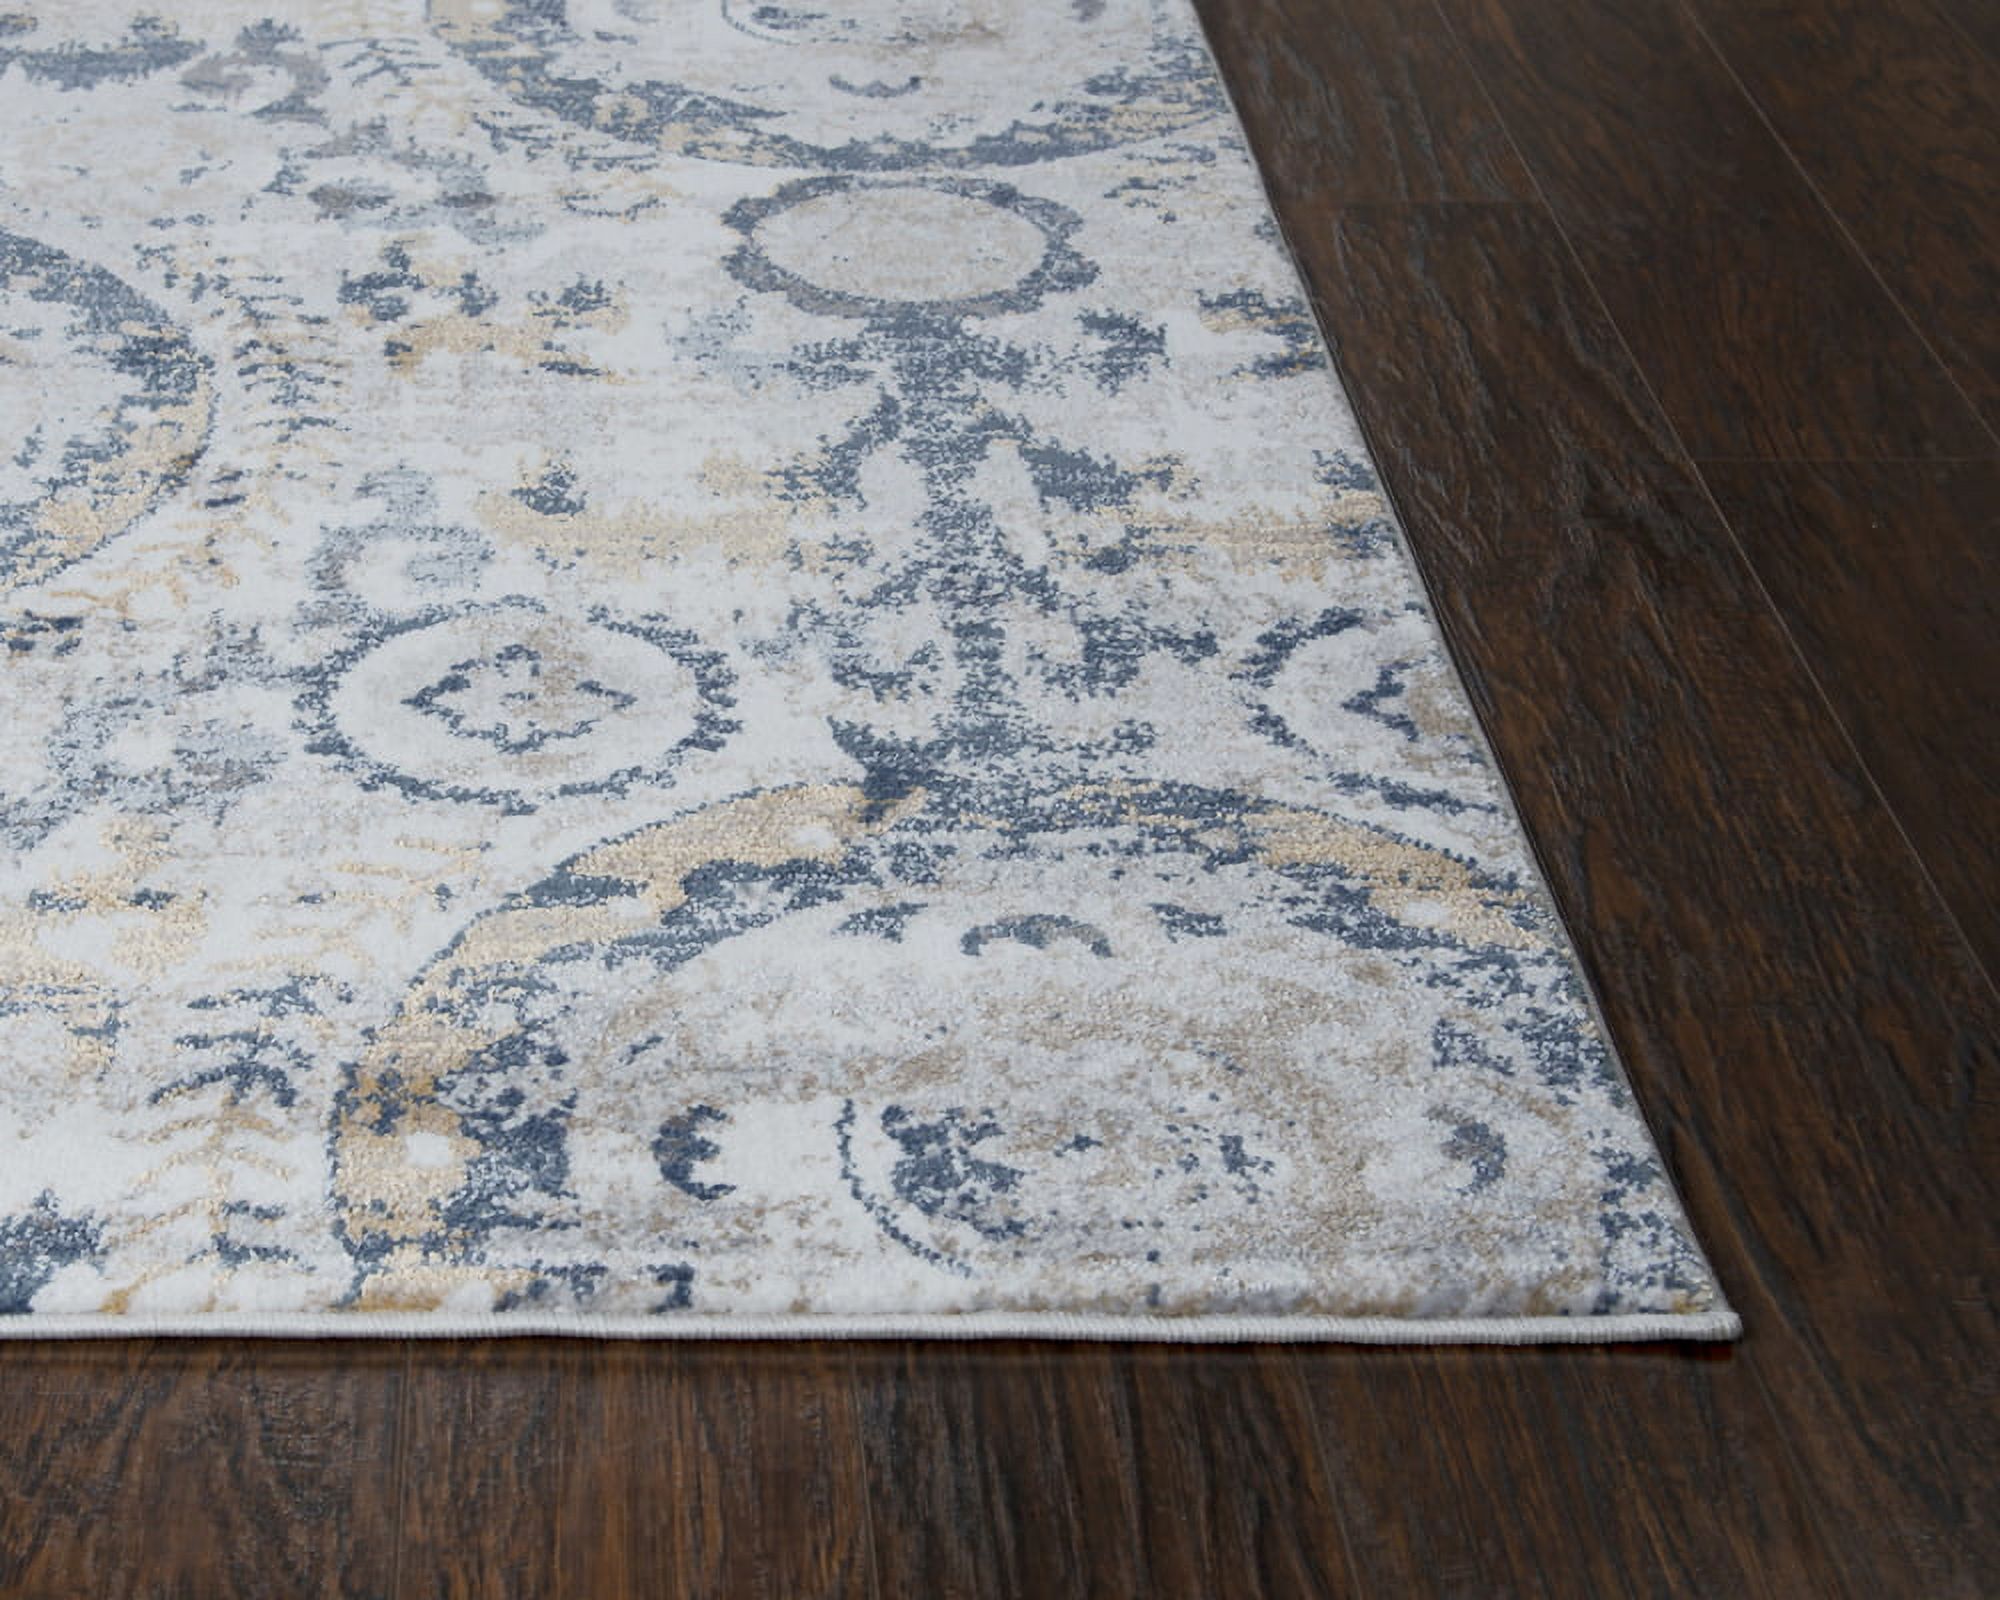 Rizzy Home Bristol Medallion Contemporary Area Rug, Gray - image 2 of 2